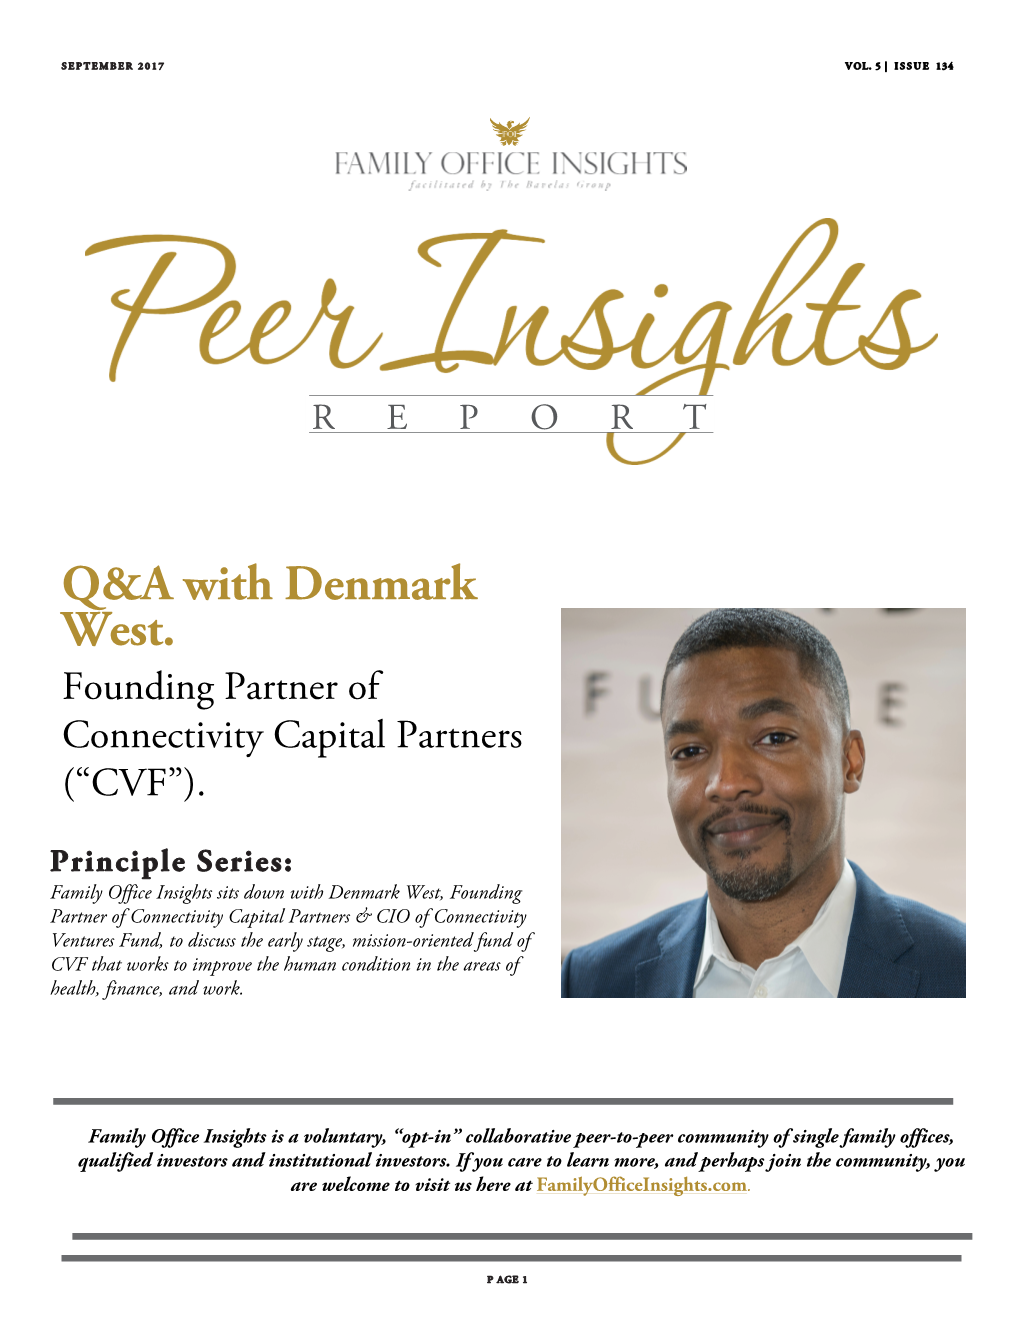 Q&A with Denmark West